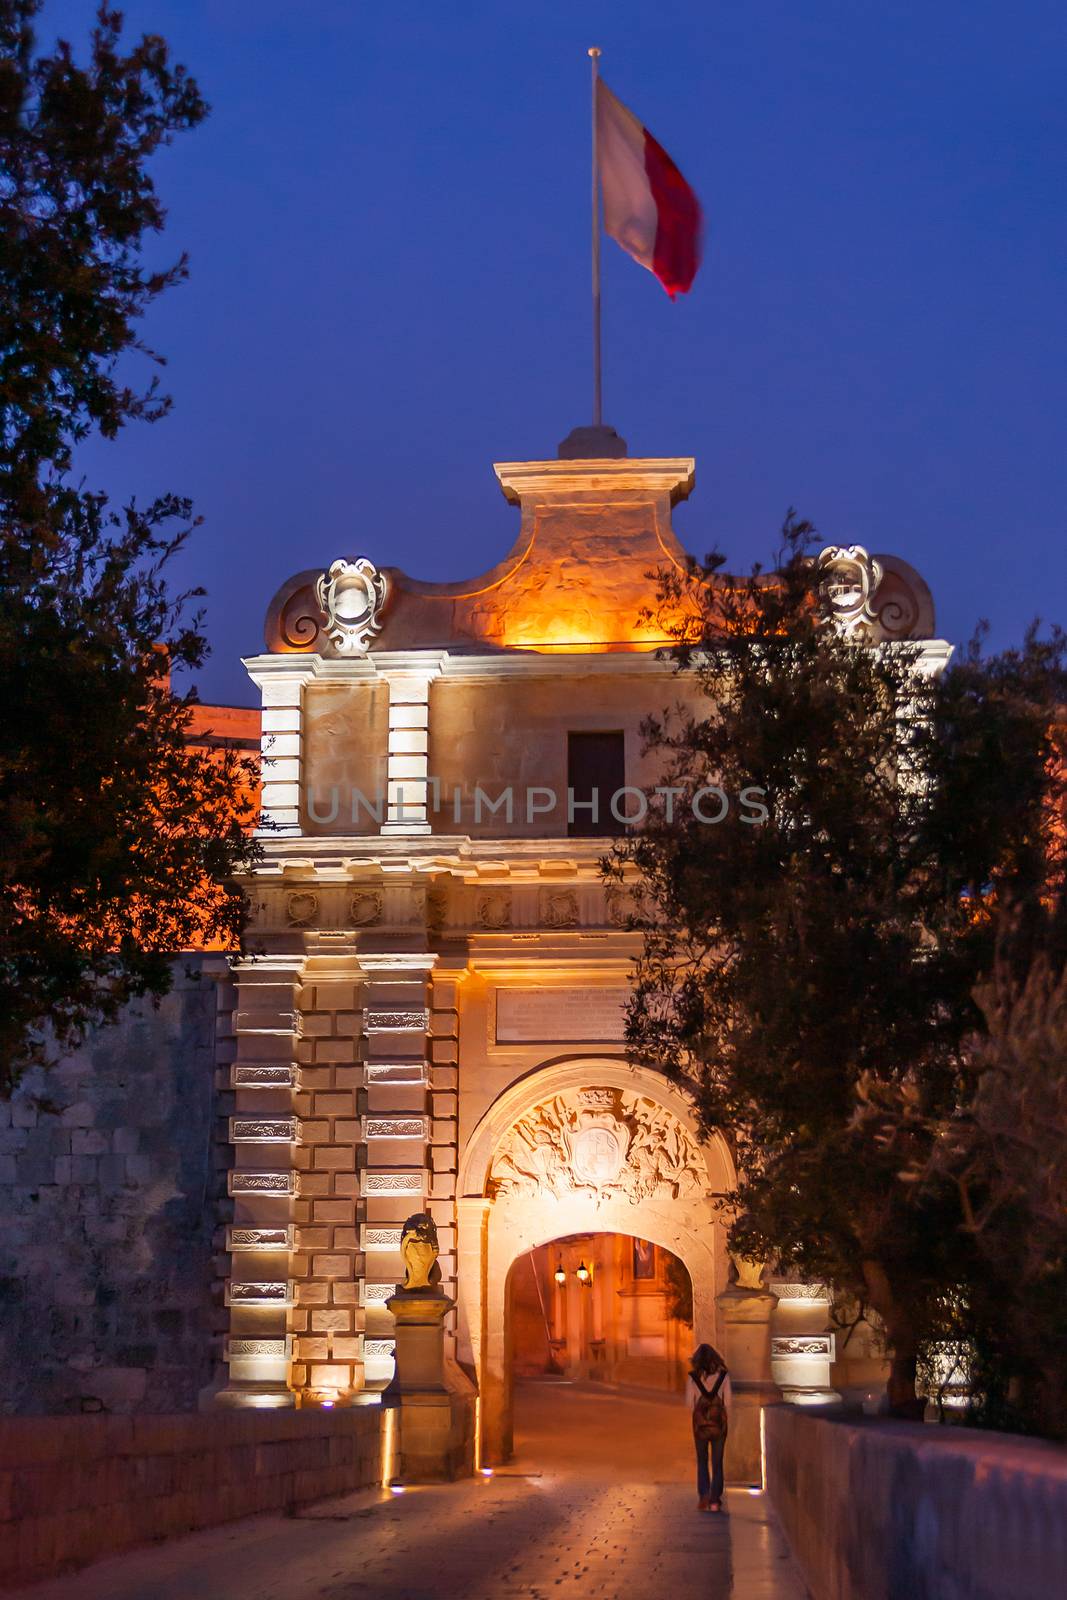 Illuminated Gate of Mdina, ancient capital of Malta. Night view on entrance into ancient town. by aksenovko